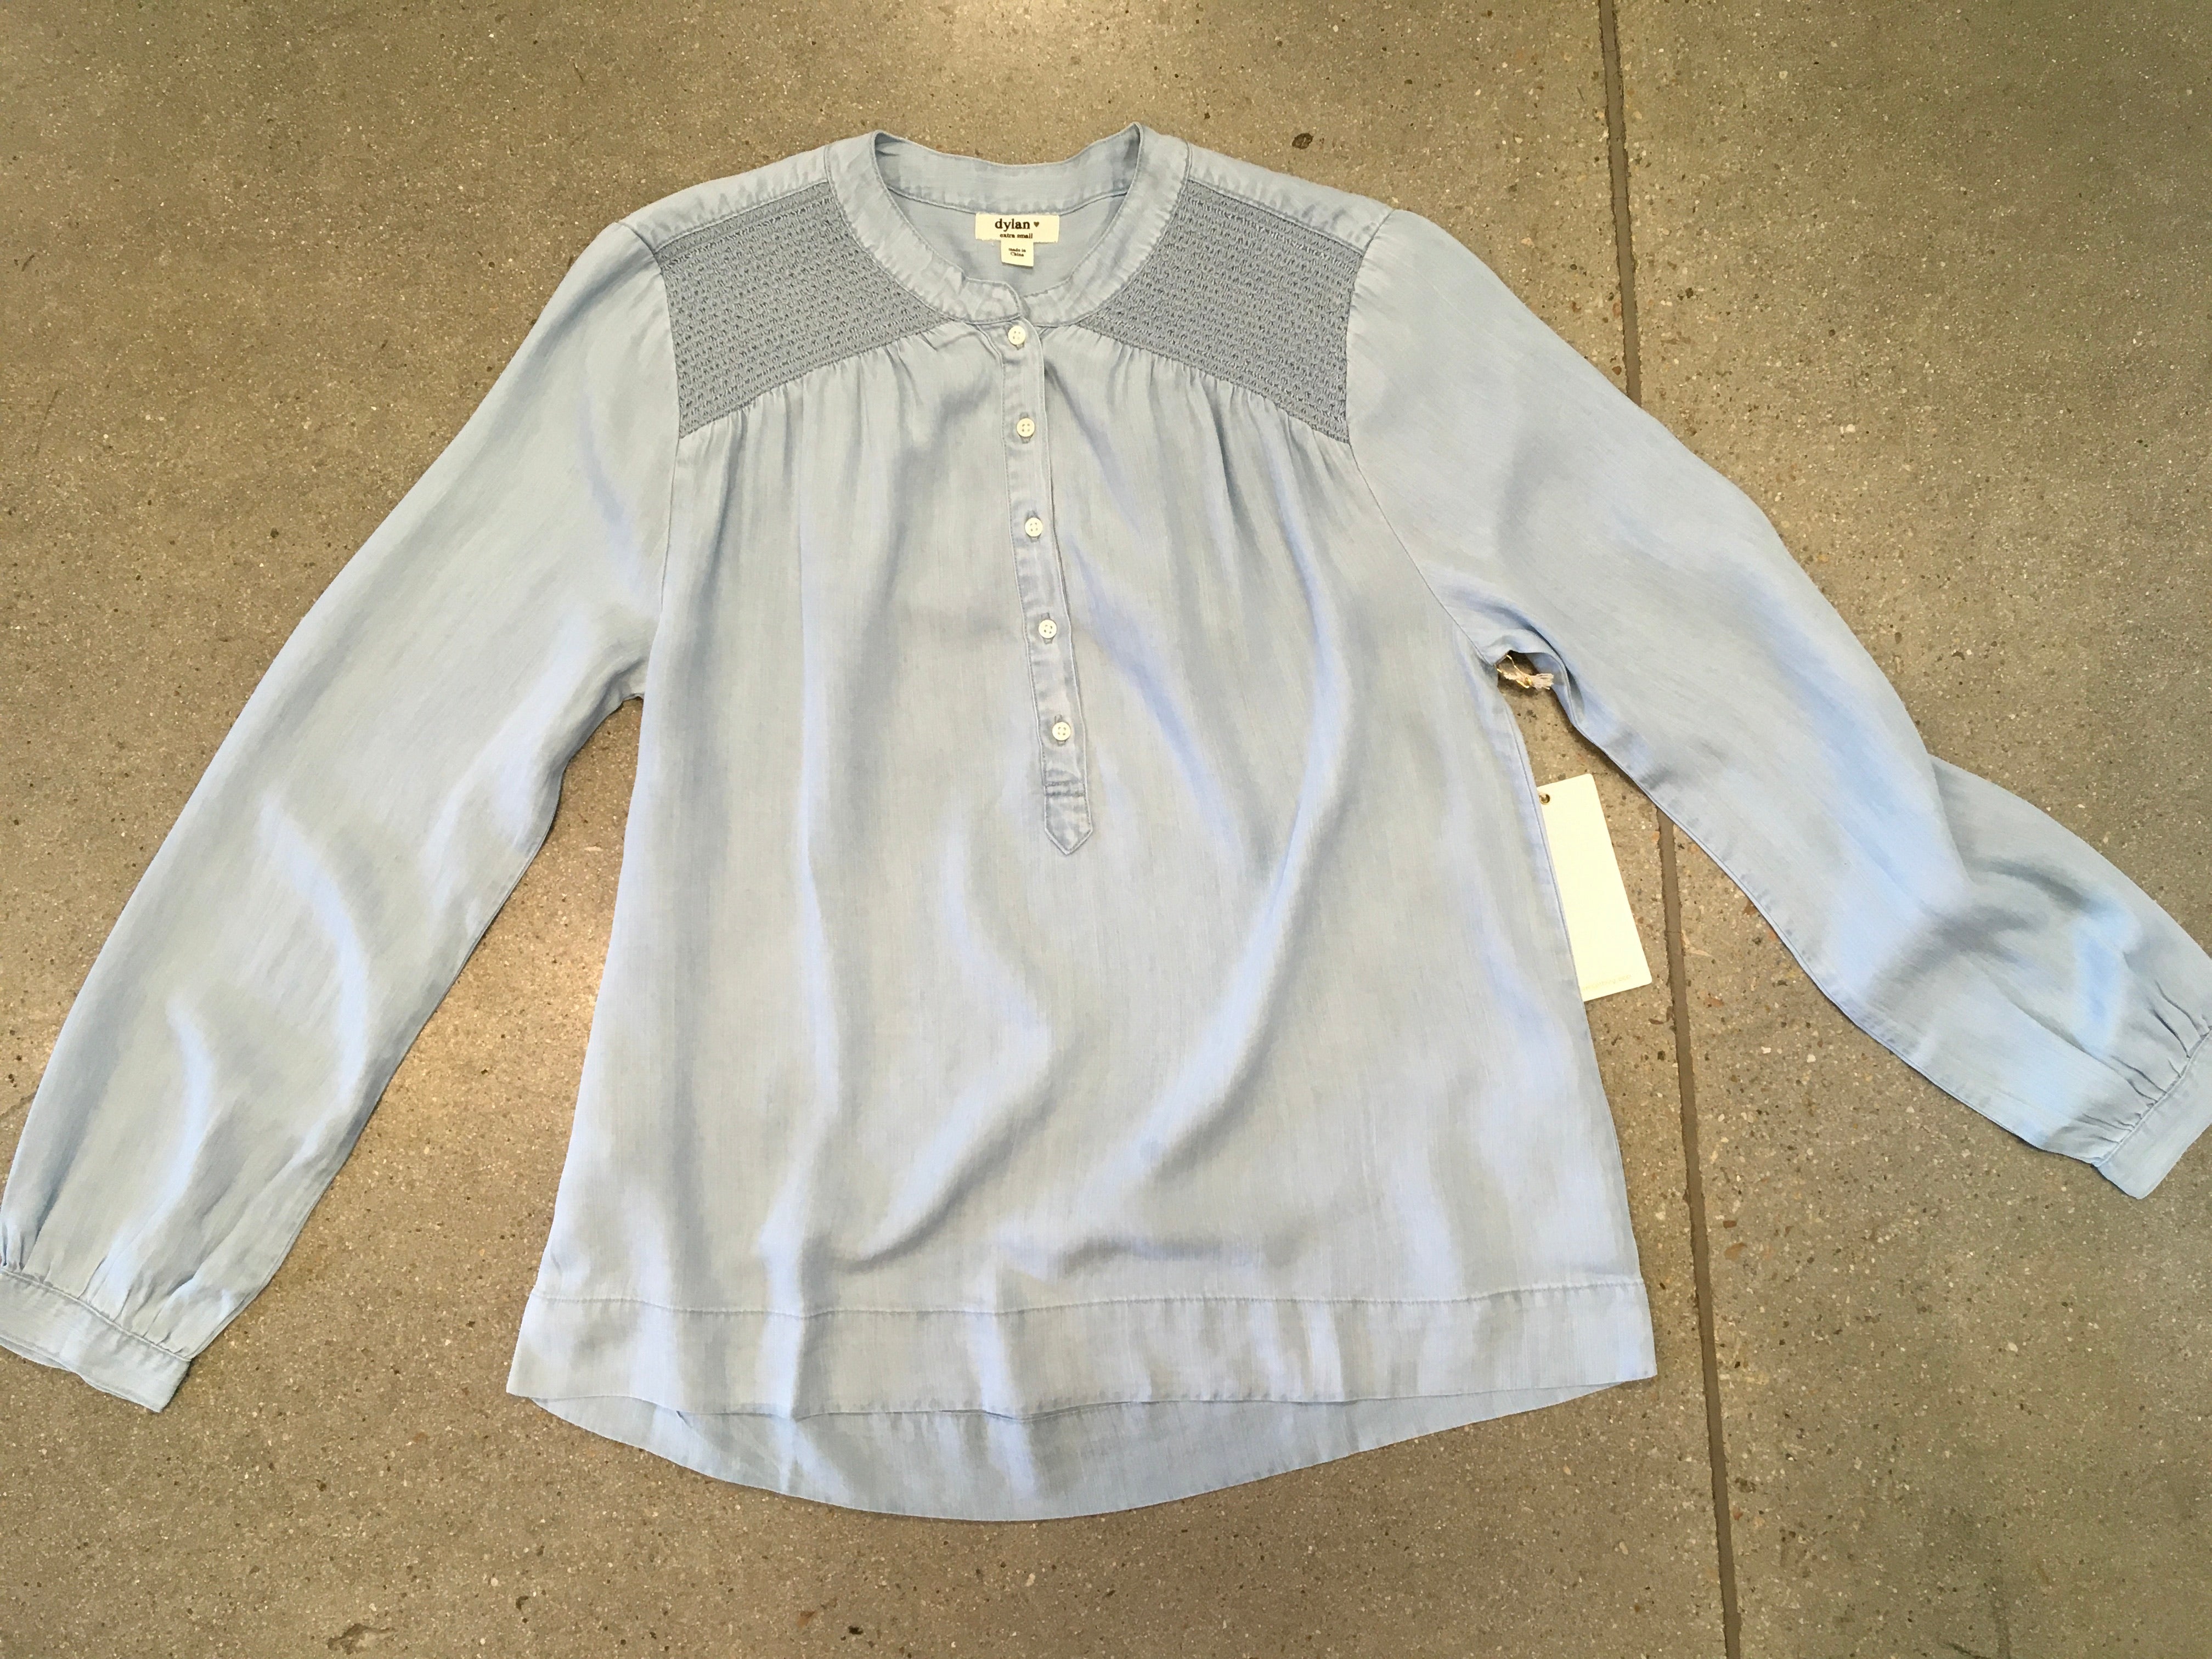 Dylan - Blaire Blouse / Faded Denim